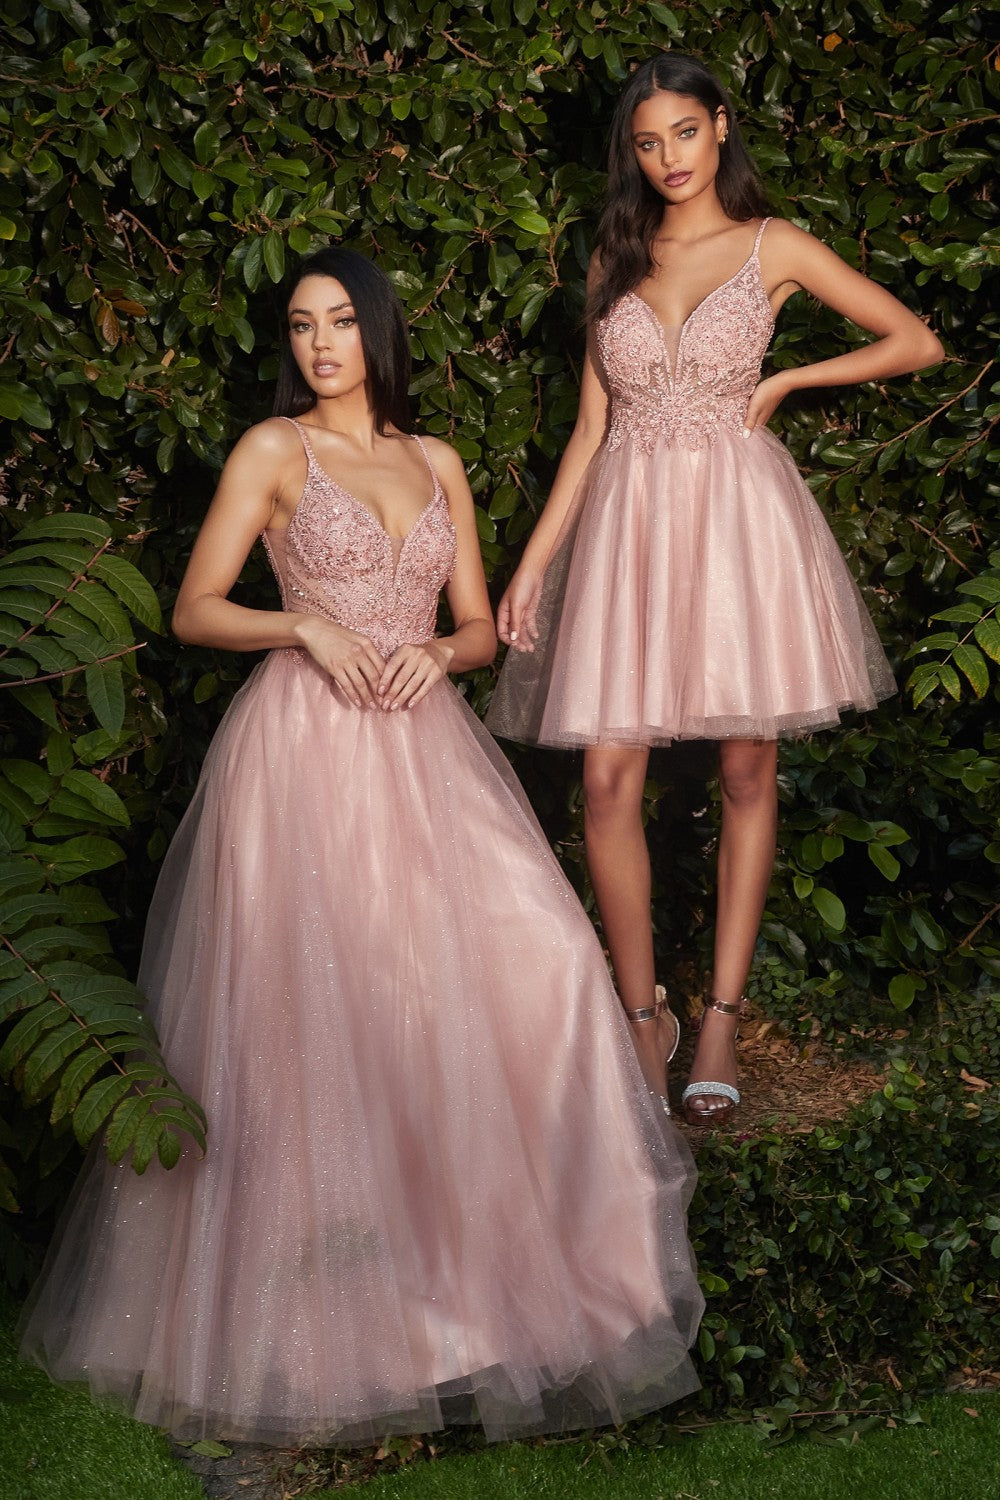 Layered Tulle A-Line Prom & Bridesmaid Gown Floral Laced V-neck V- Back Bodice Vintage Cute Evening Ball Dress Vintage Gown CDCD0195 Sale Elsy Style Prom Dress